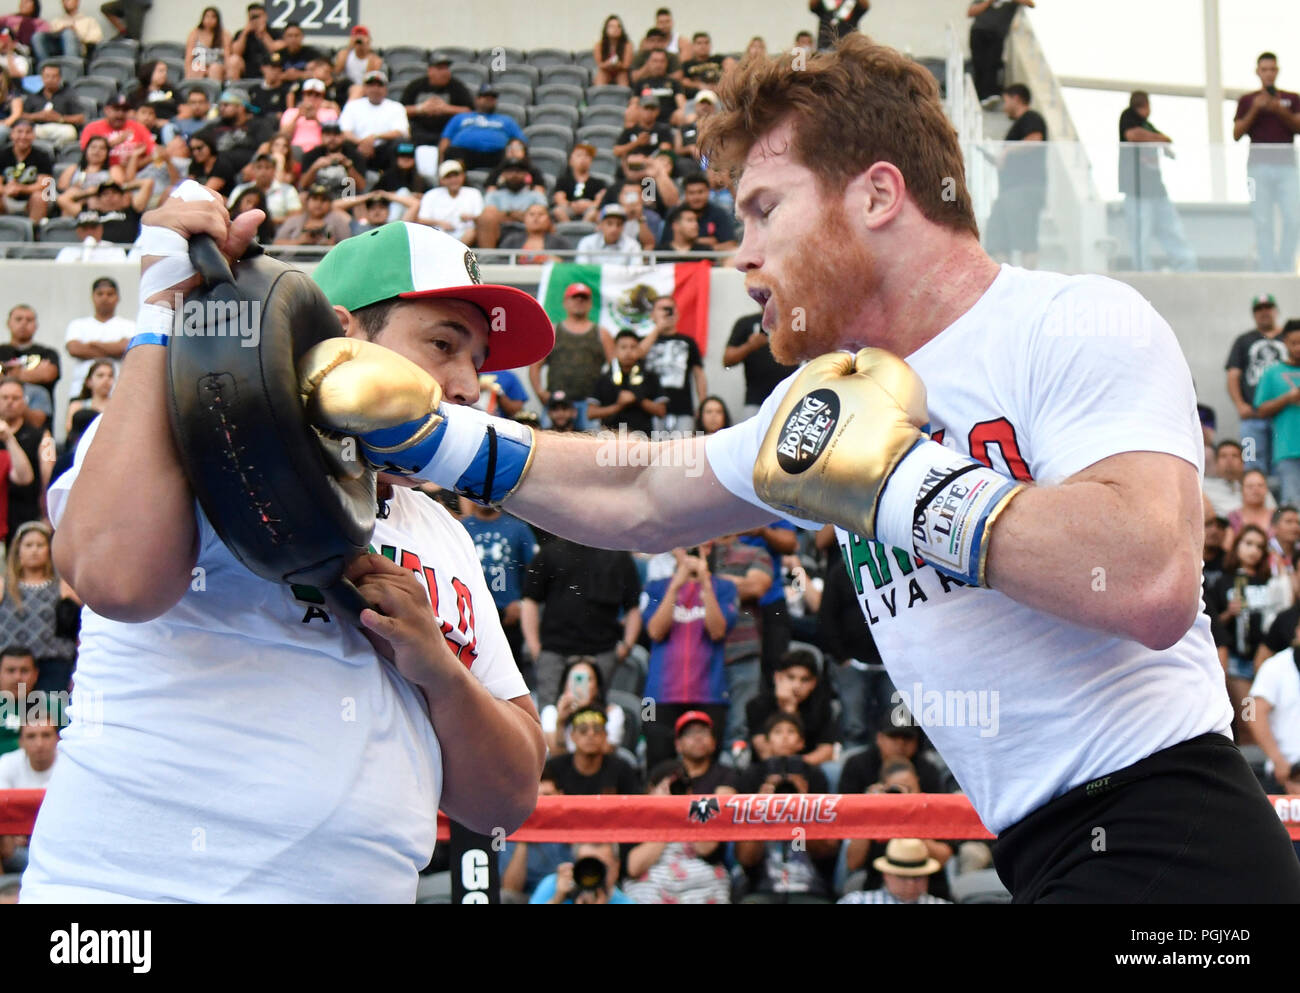 California, USA. 26th Aug, 2018. Canelo Alvarez workouts for the fans Sunday at Banc of California Stadium. 26th Aug, 2018. Today Canelo Alvarez and GGG did media day workouts in preparation for their anticipated rematch on September 15 in Las Vegas.Photo by Gene Blevins/LA DailyNews/SCNG/ZUMAPRESS Credit: Gene Blevins/ZUMA Wire/Alamy Live News Stock Photo